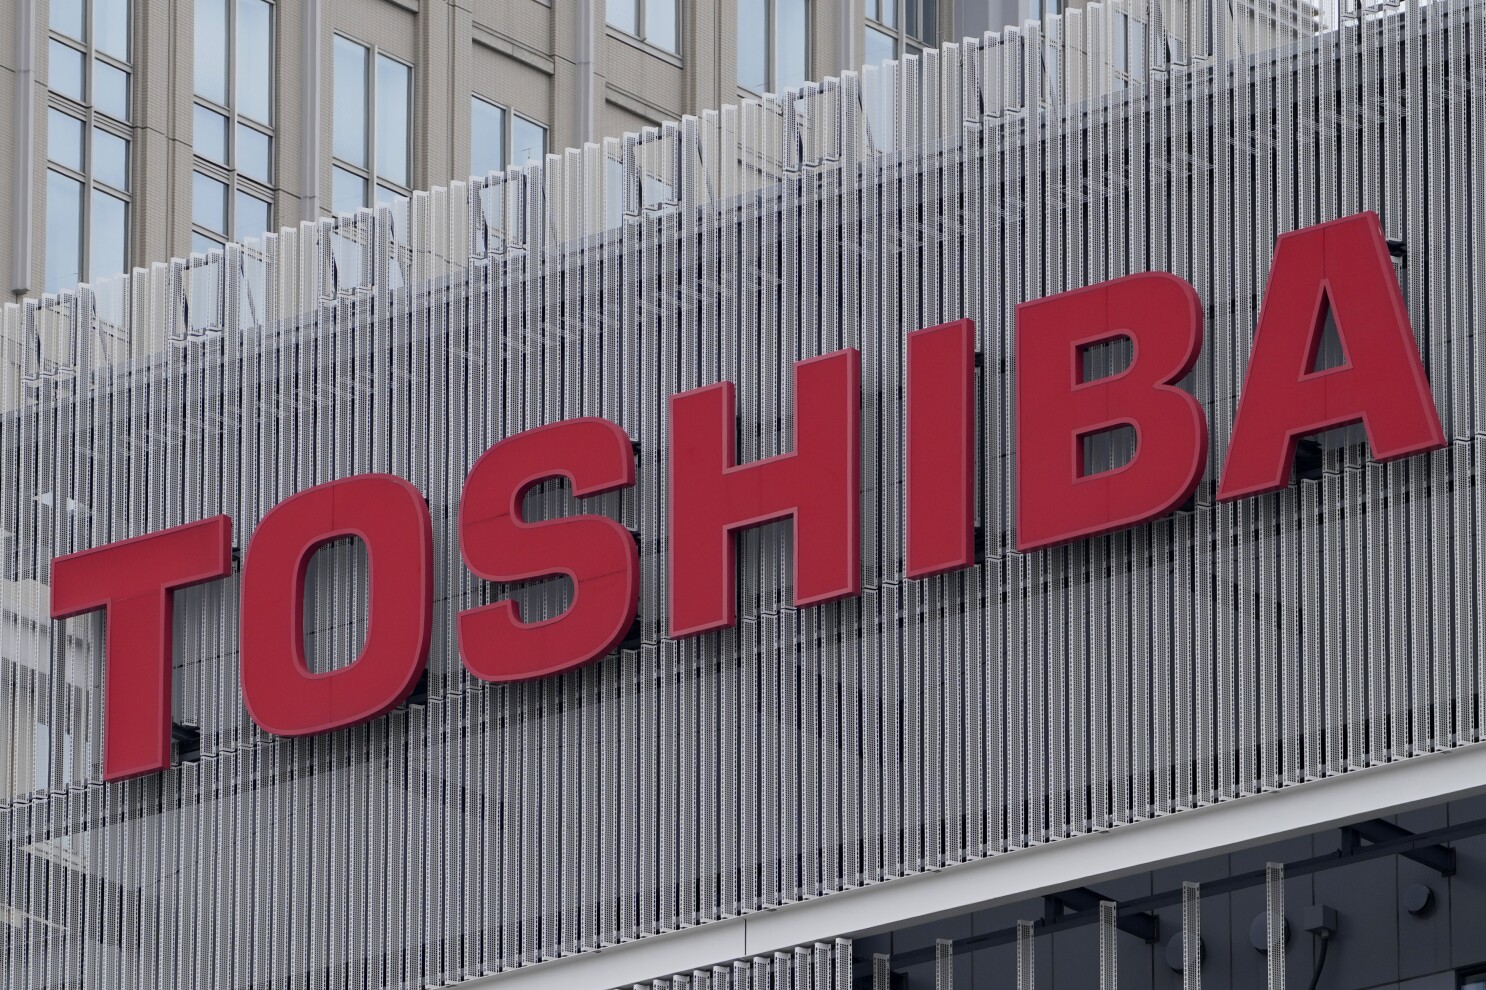 Compare prices for Toshiba across all European  stores